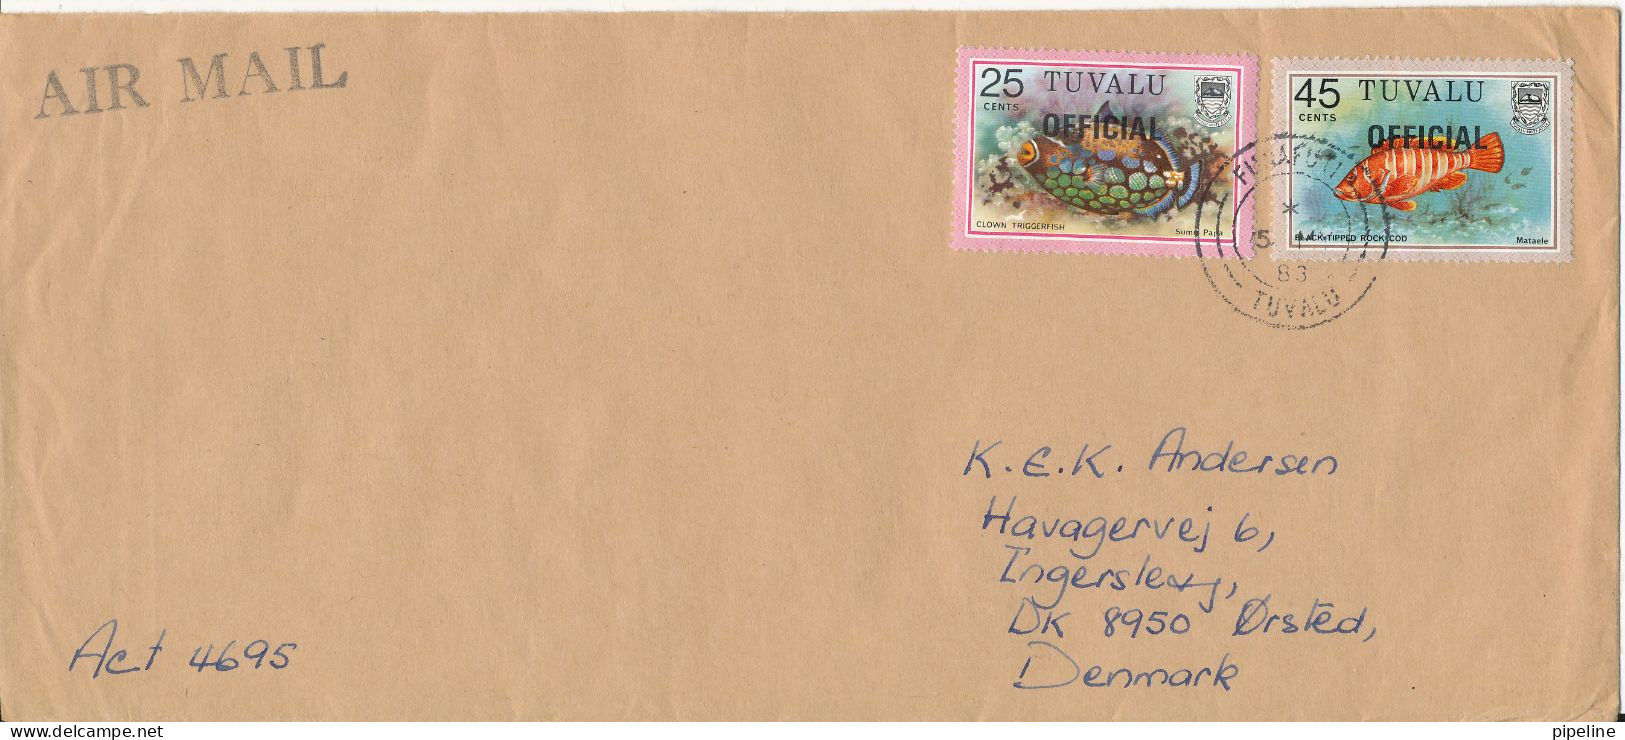 Tuvalu Cover Overprinted OFFICIAL Sent Air Mail To Denmark 15-5-1983 Topic Stamps FISH - Tuvalu (fr. Elliceinseln)